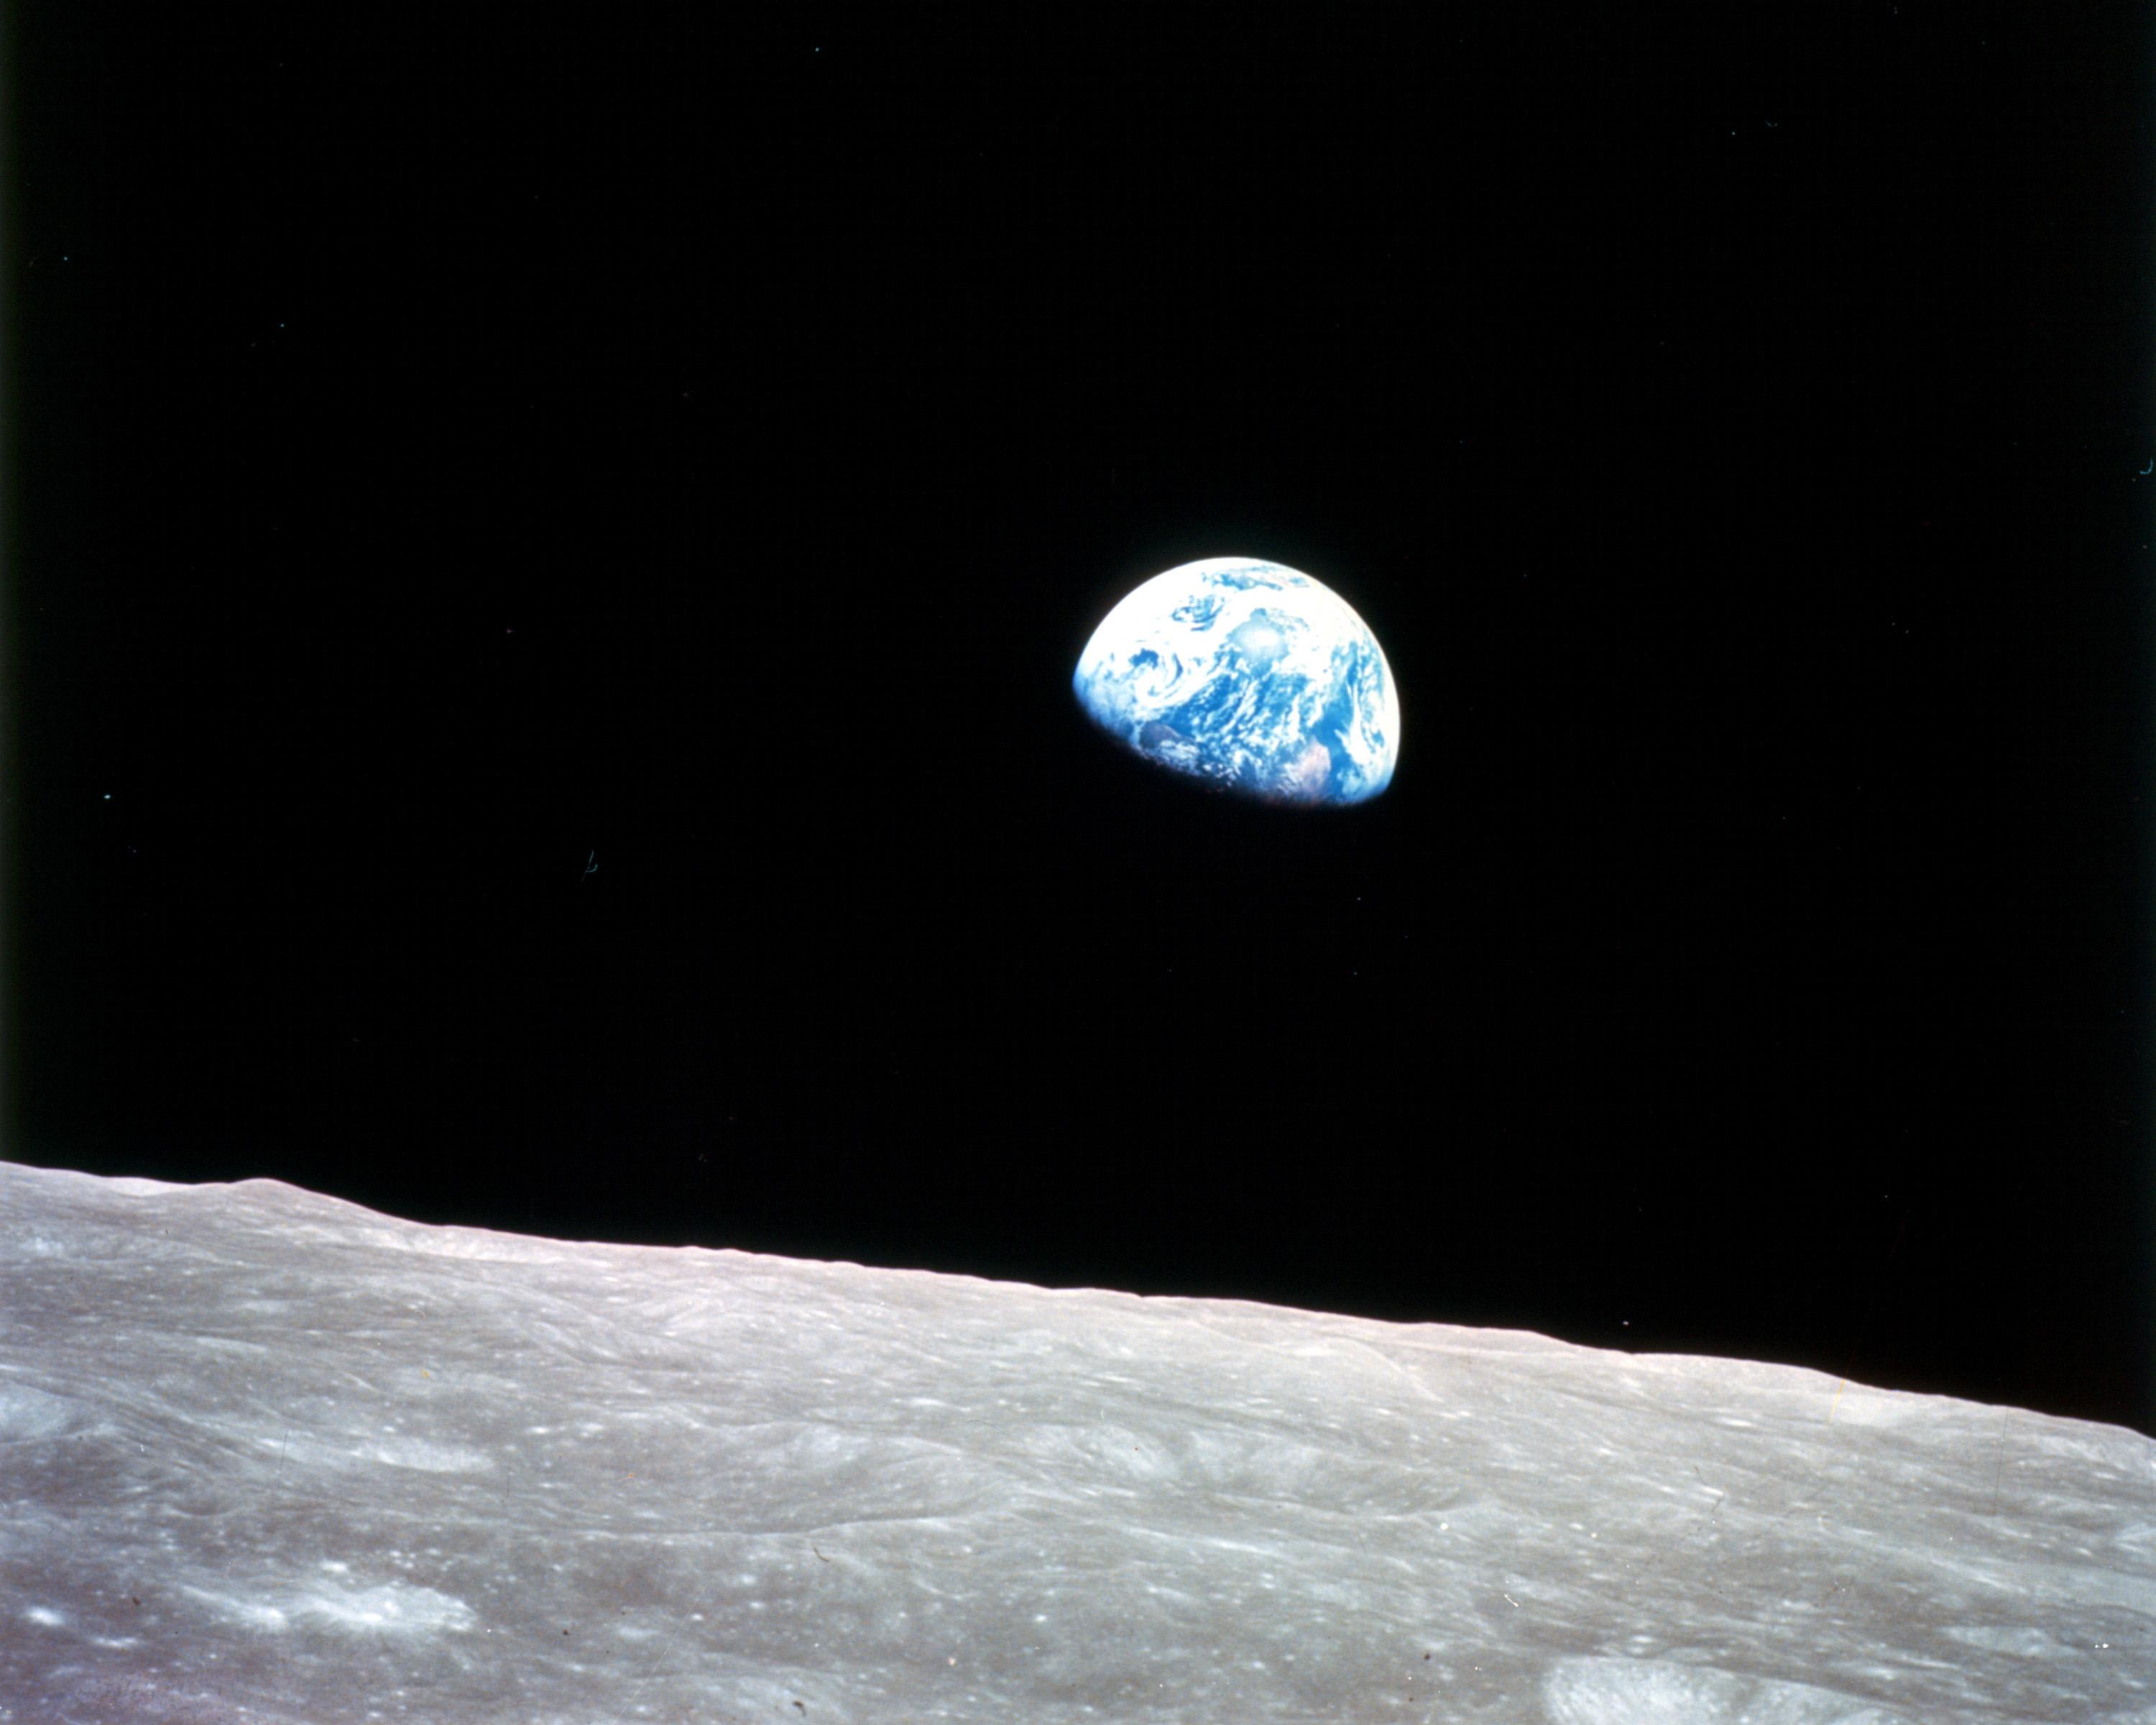 Earth as seen from the surface of the moon